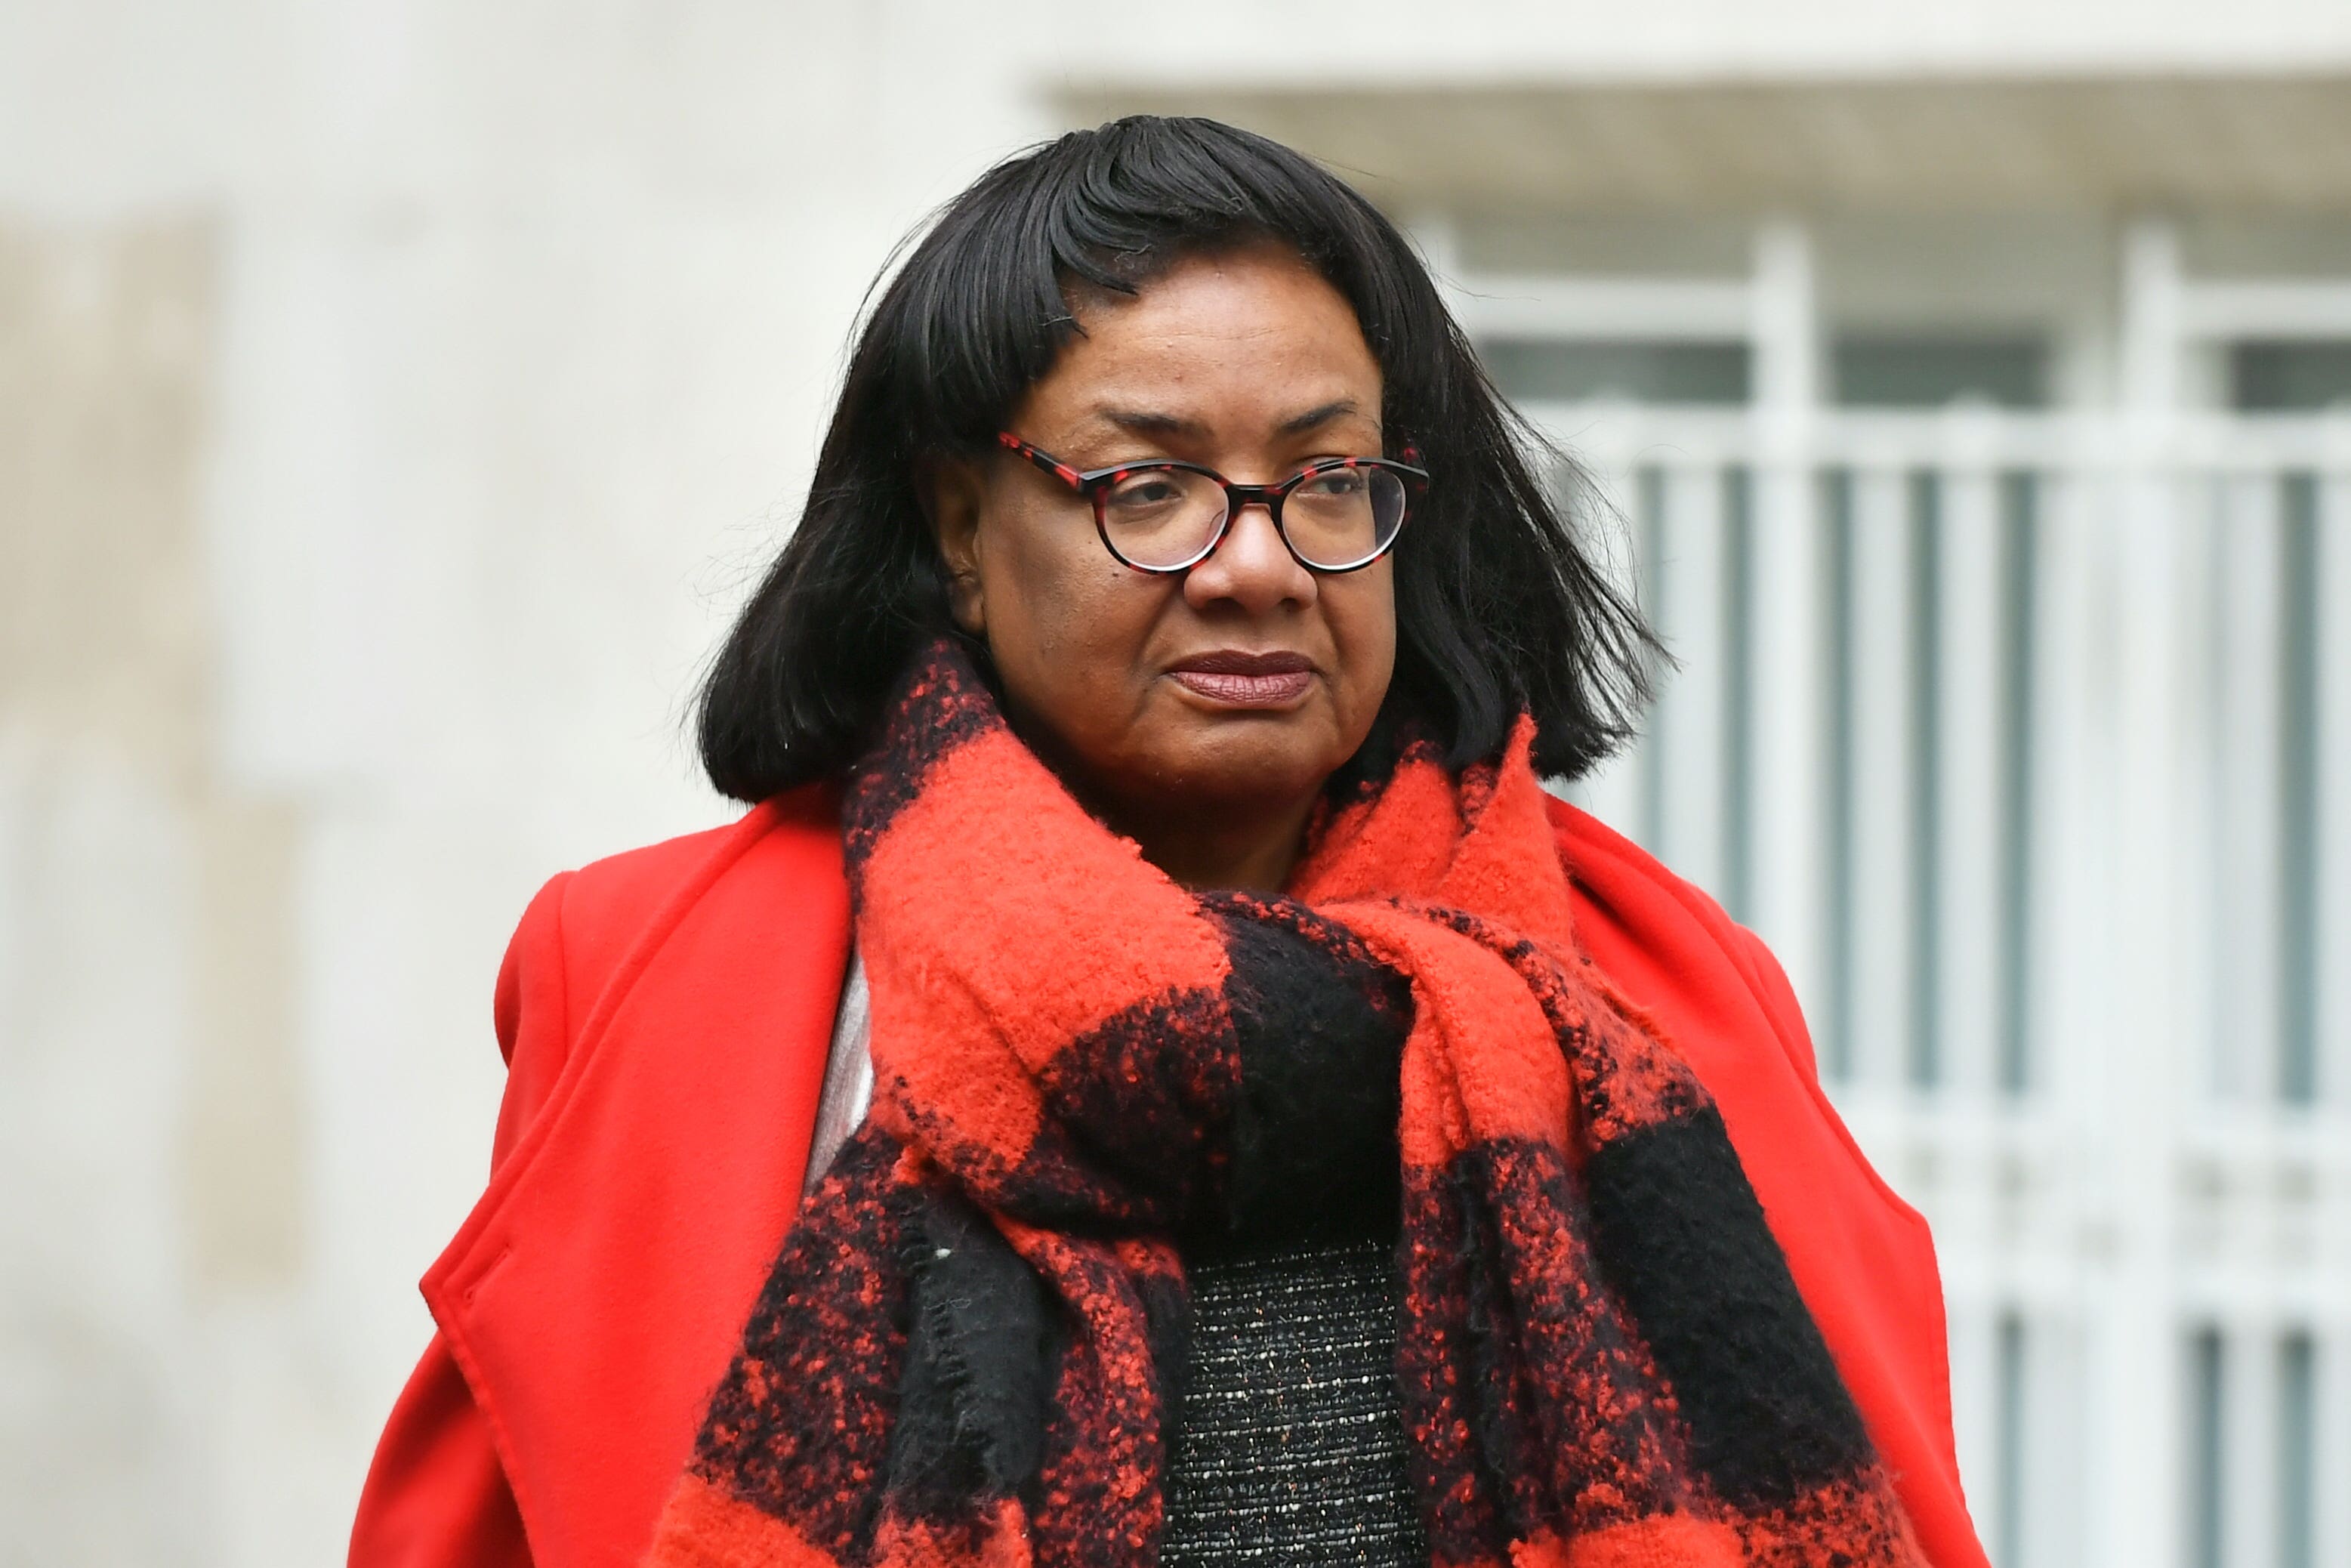 Labour MP Diane Abbott has asked what would have happened if the chant had been about Ukraine